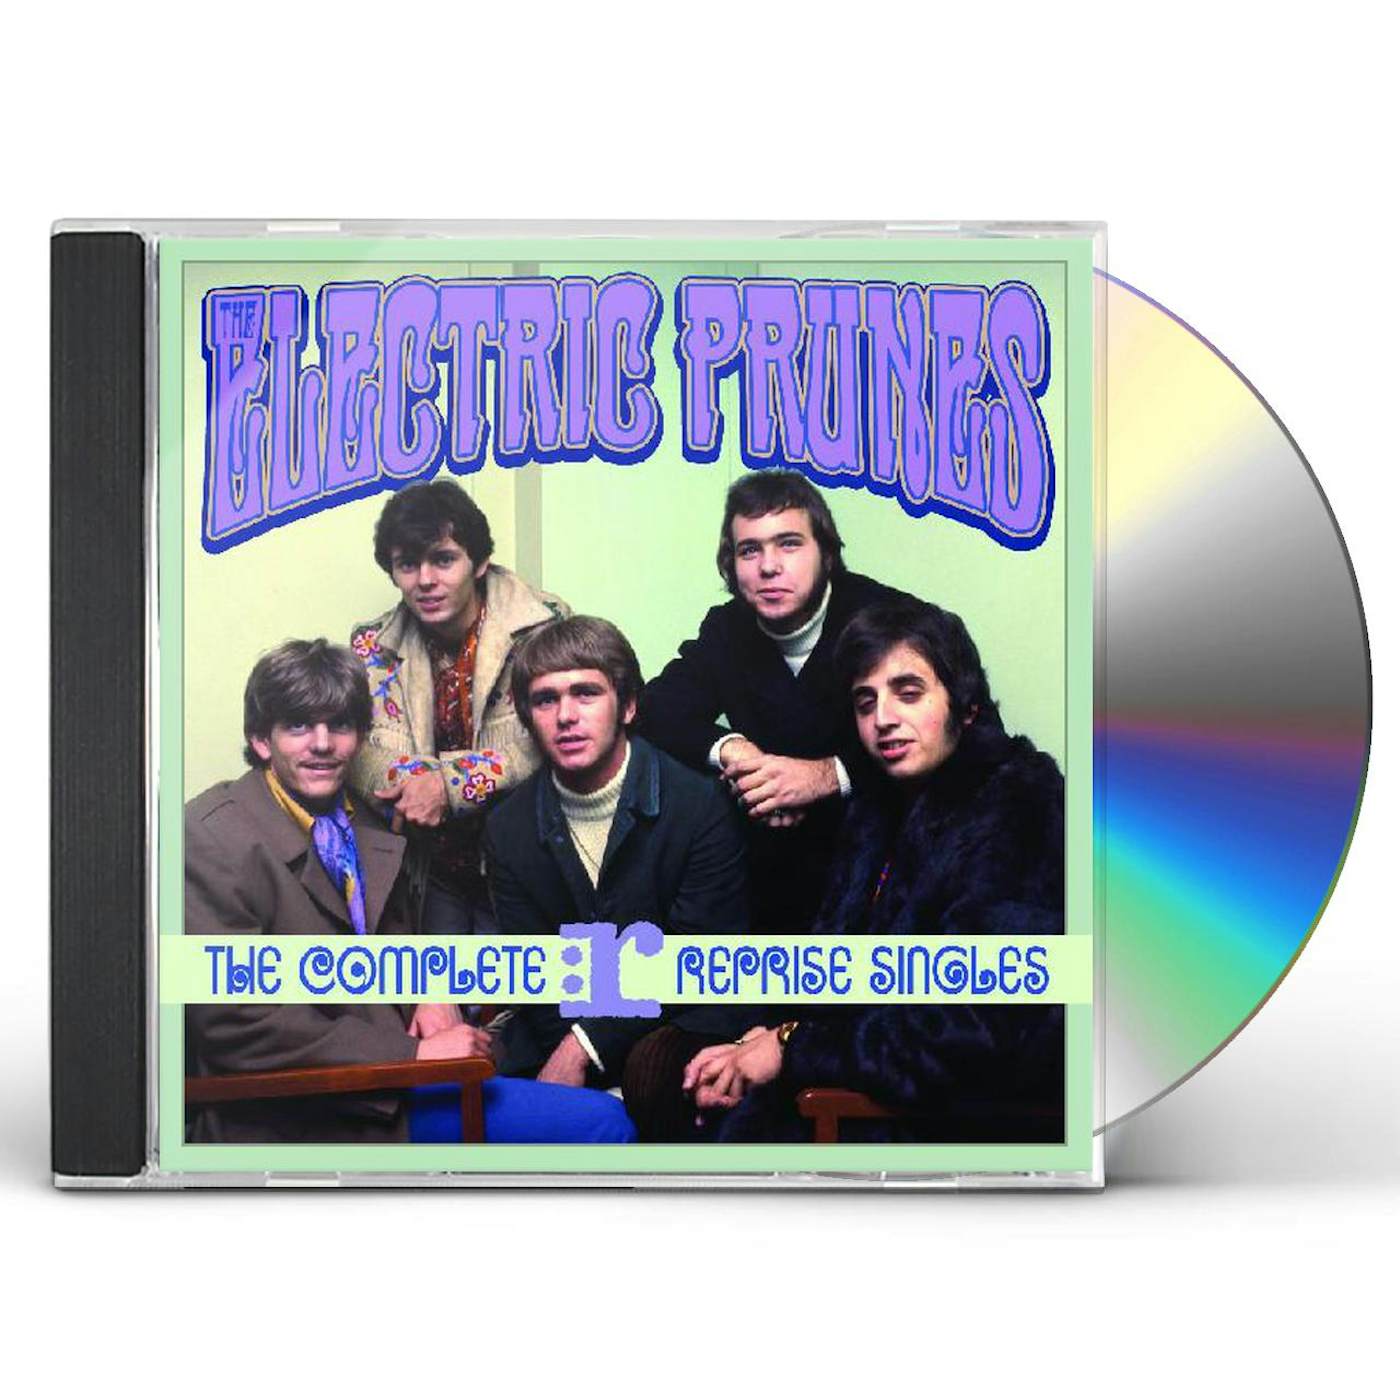 The Electric Prunes COMPLETE REPRISE SINGLES CD